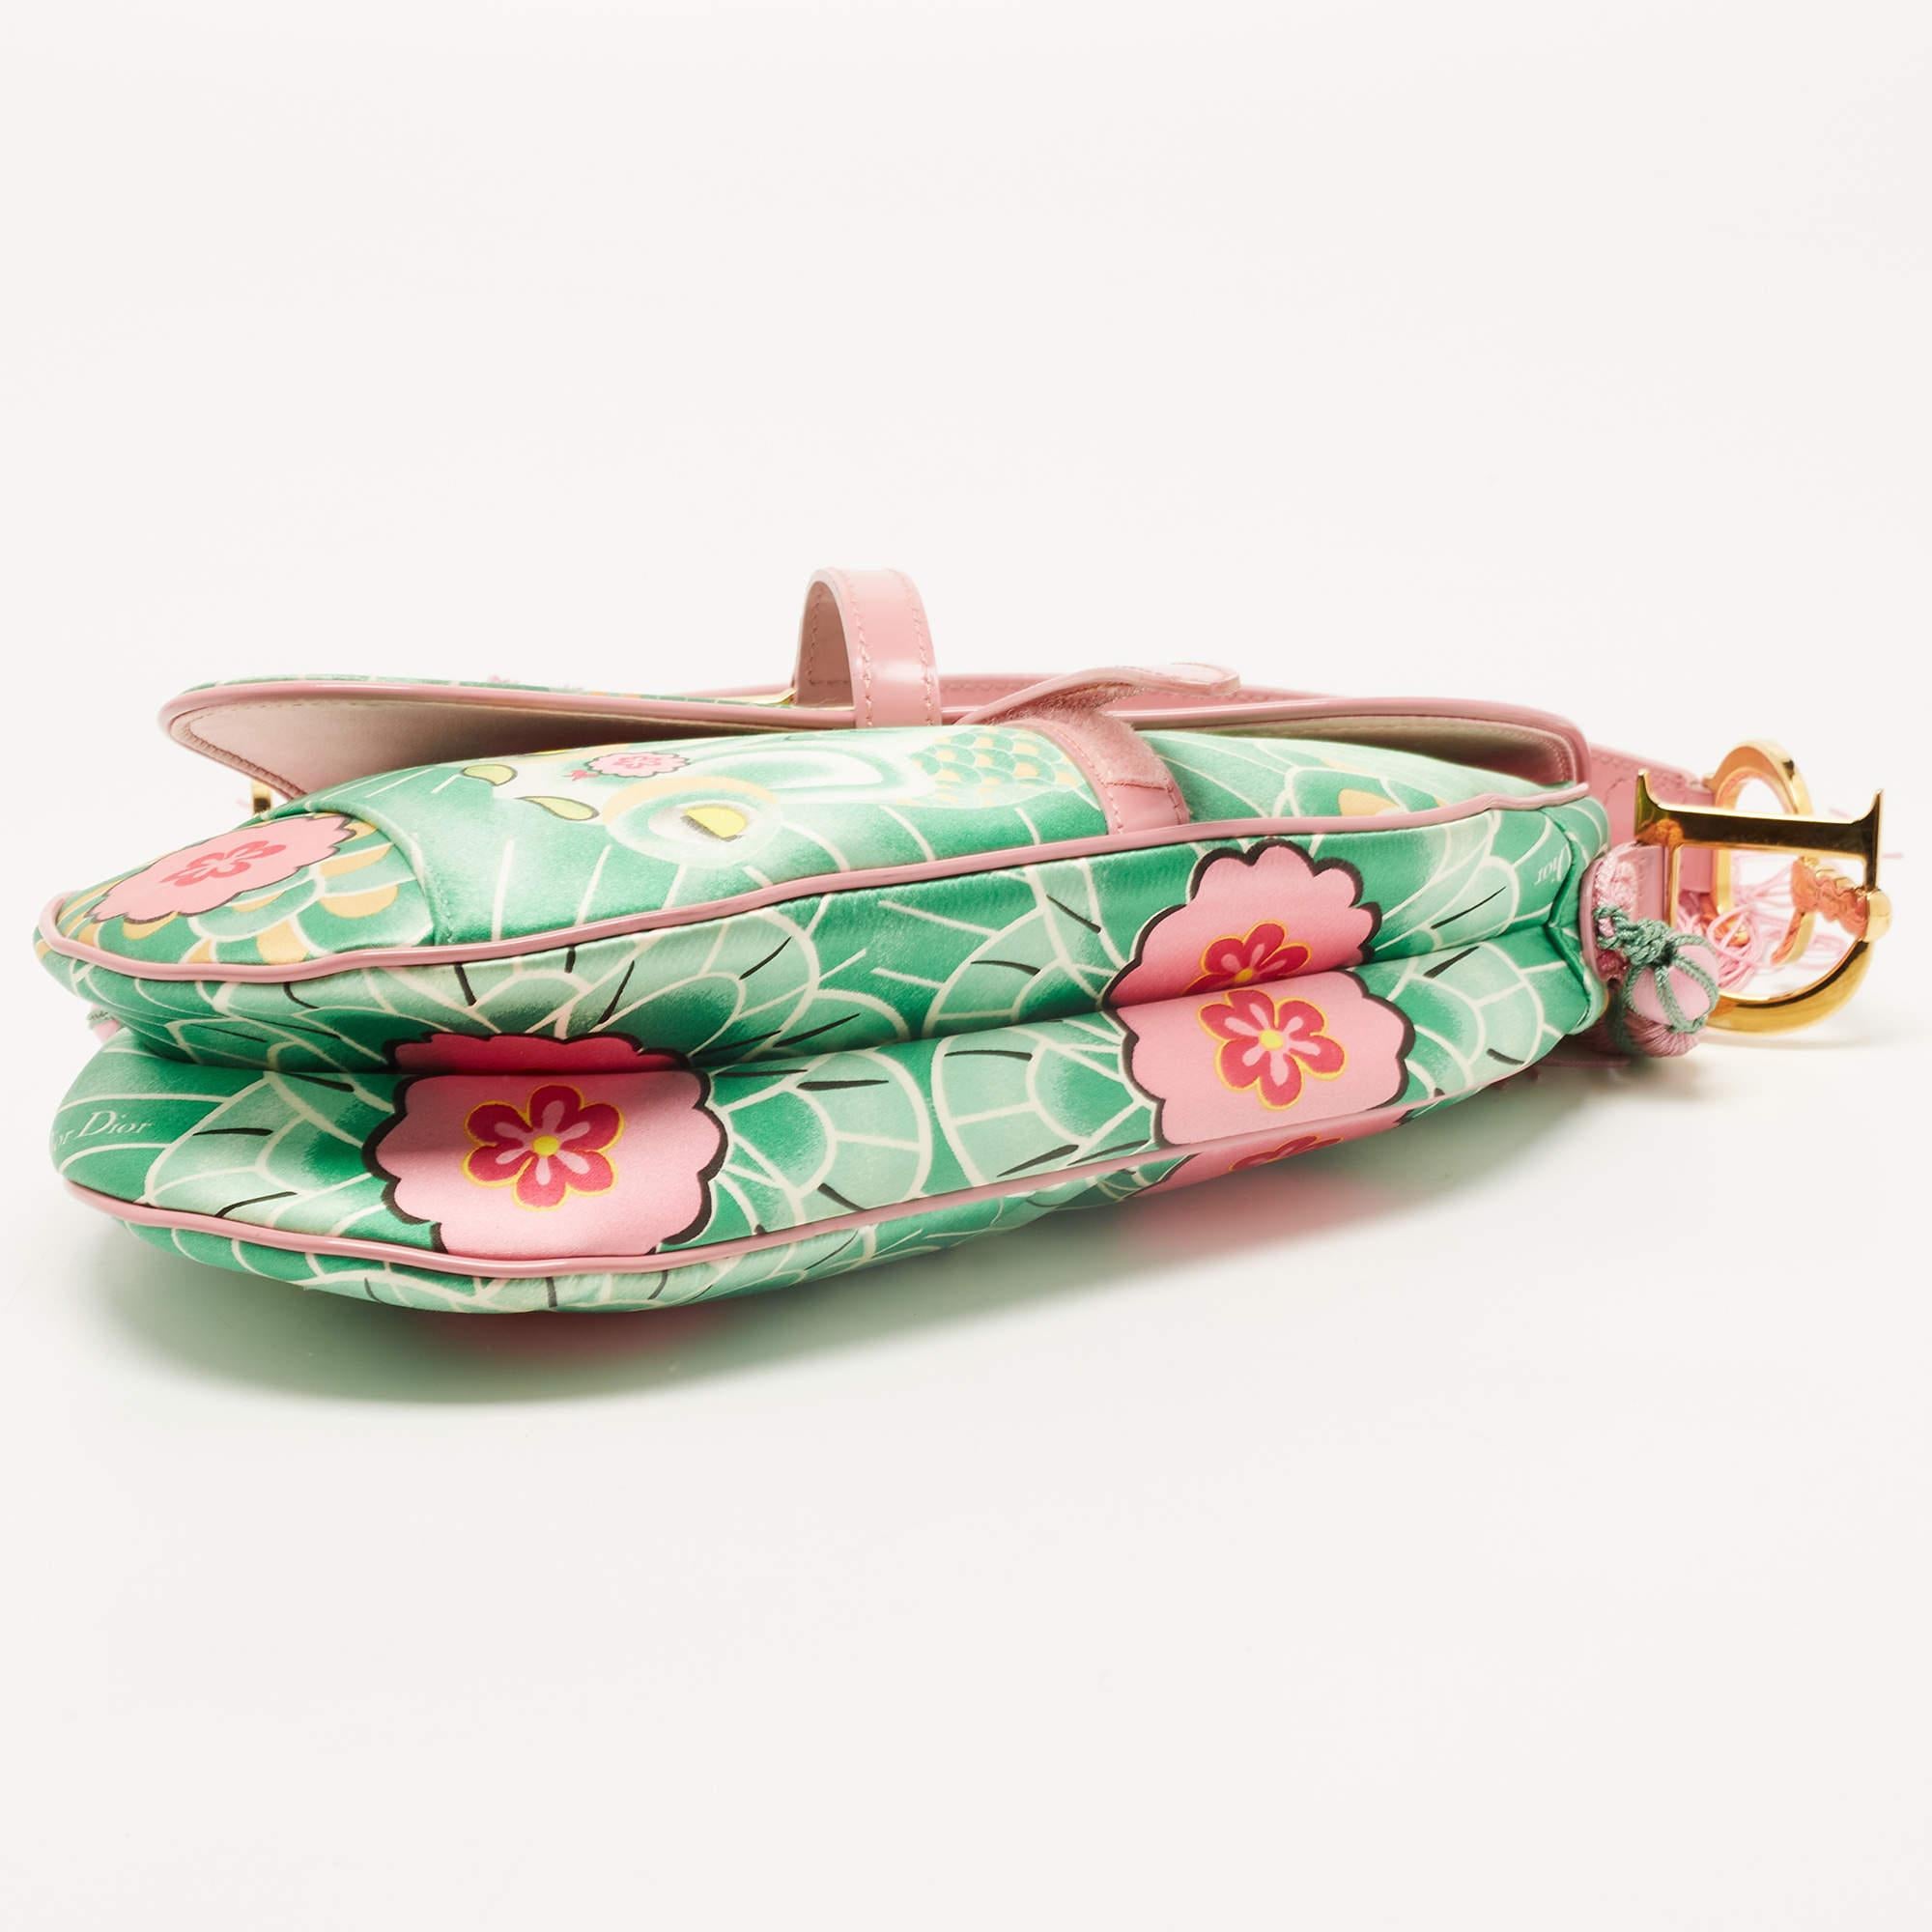 Dior Pink/Green Printed Satin and Glazed Leather Limited Edition 0705 Saddle Bag 1